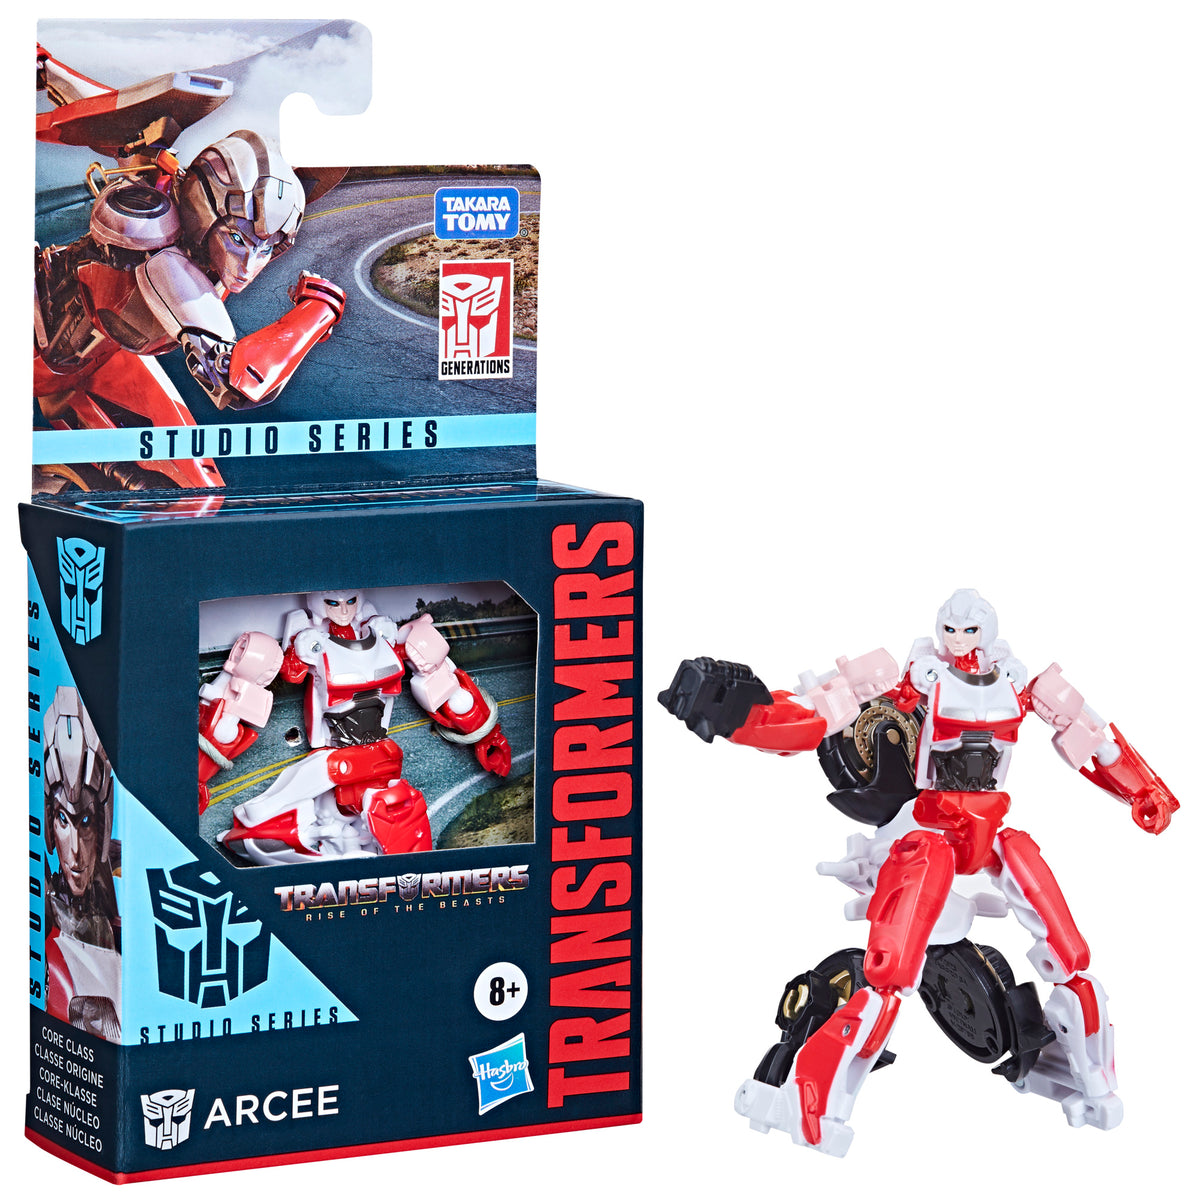 What're your thoughts on Transformers Prime Arcee? : r/transformers